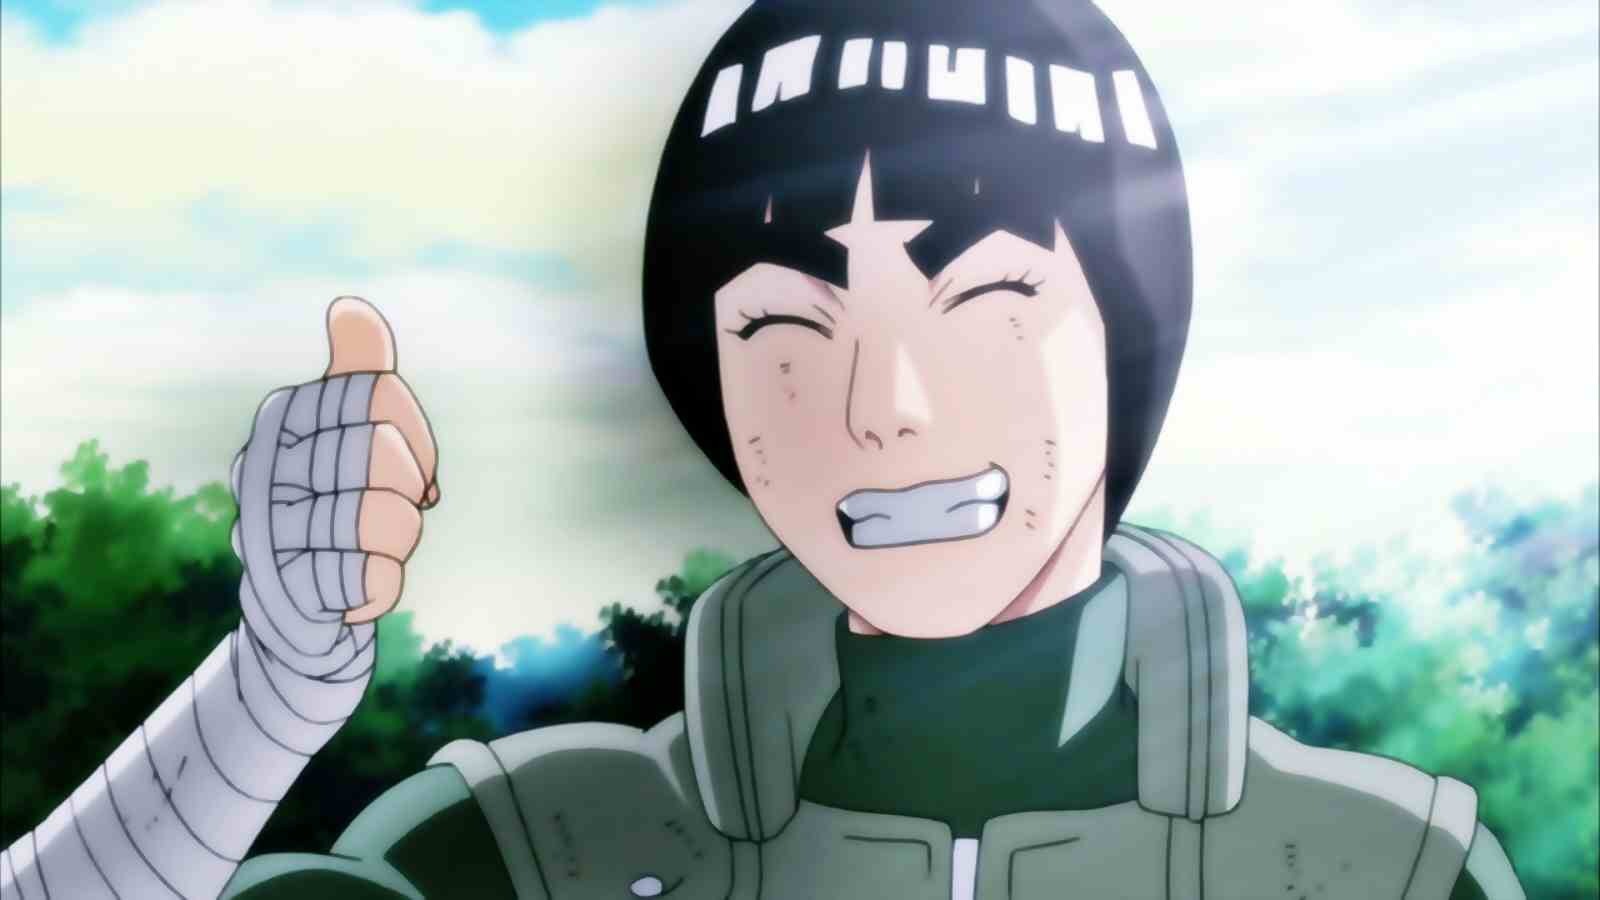 Imagine the Olympics with Rock Lee and other anime stars competing!